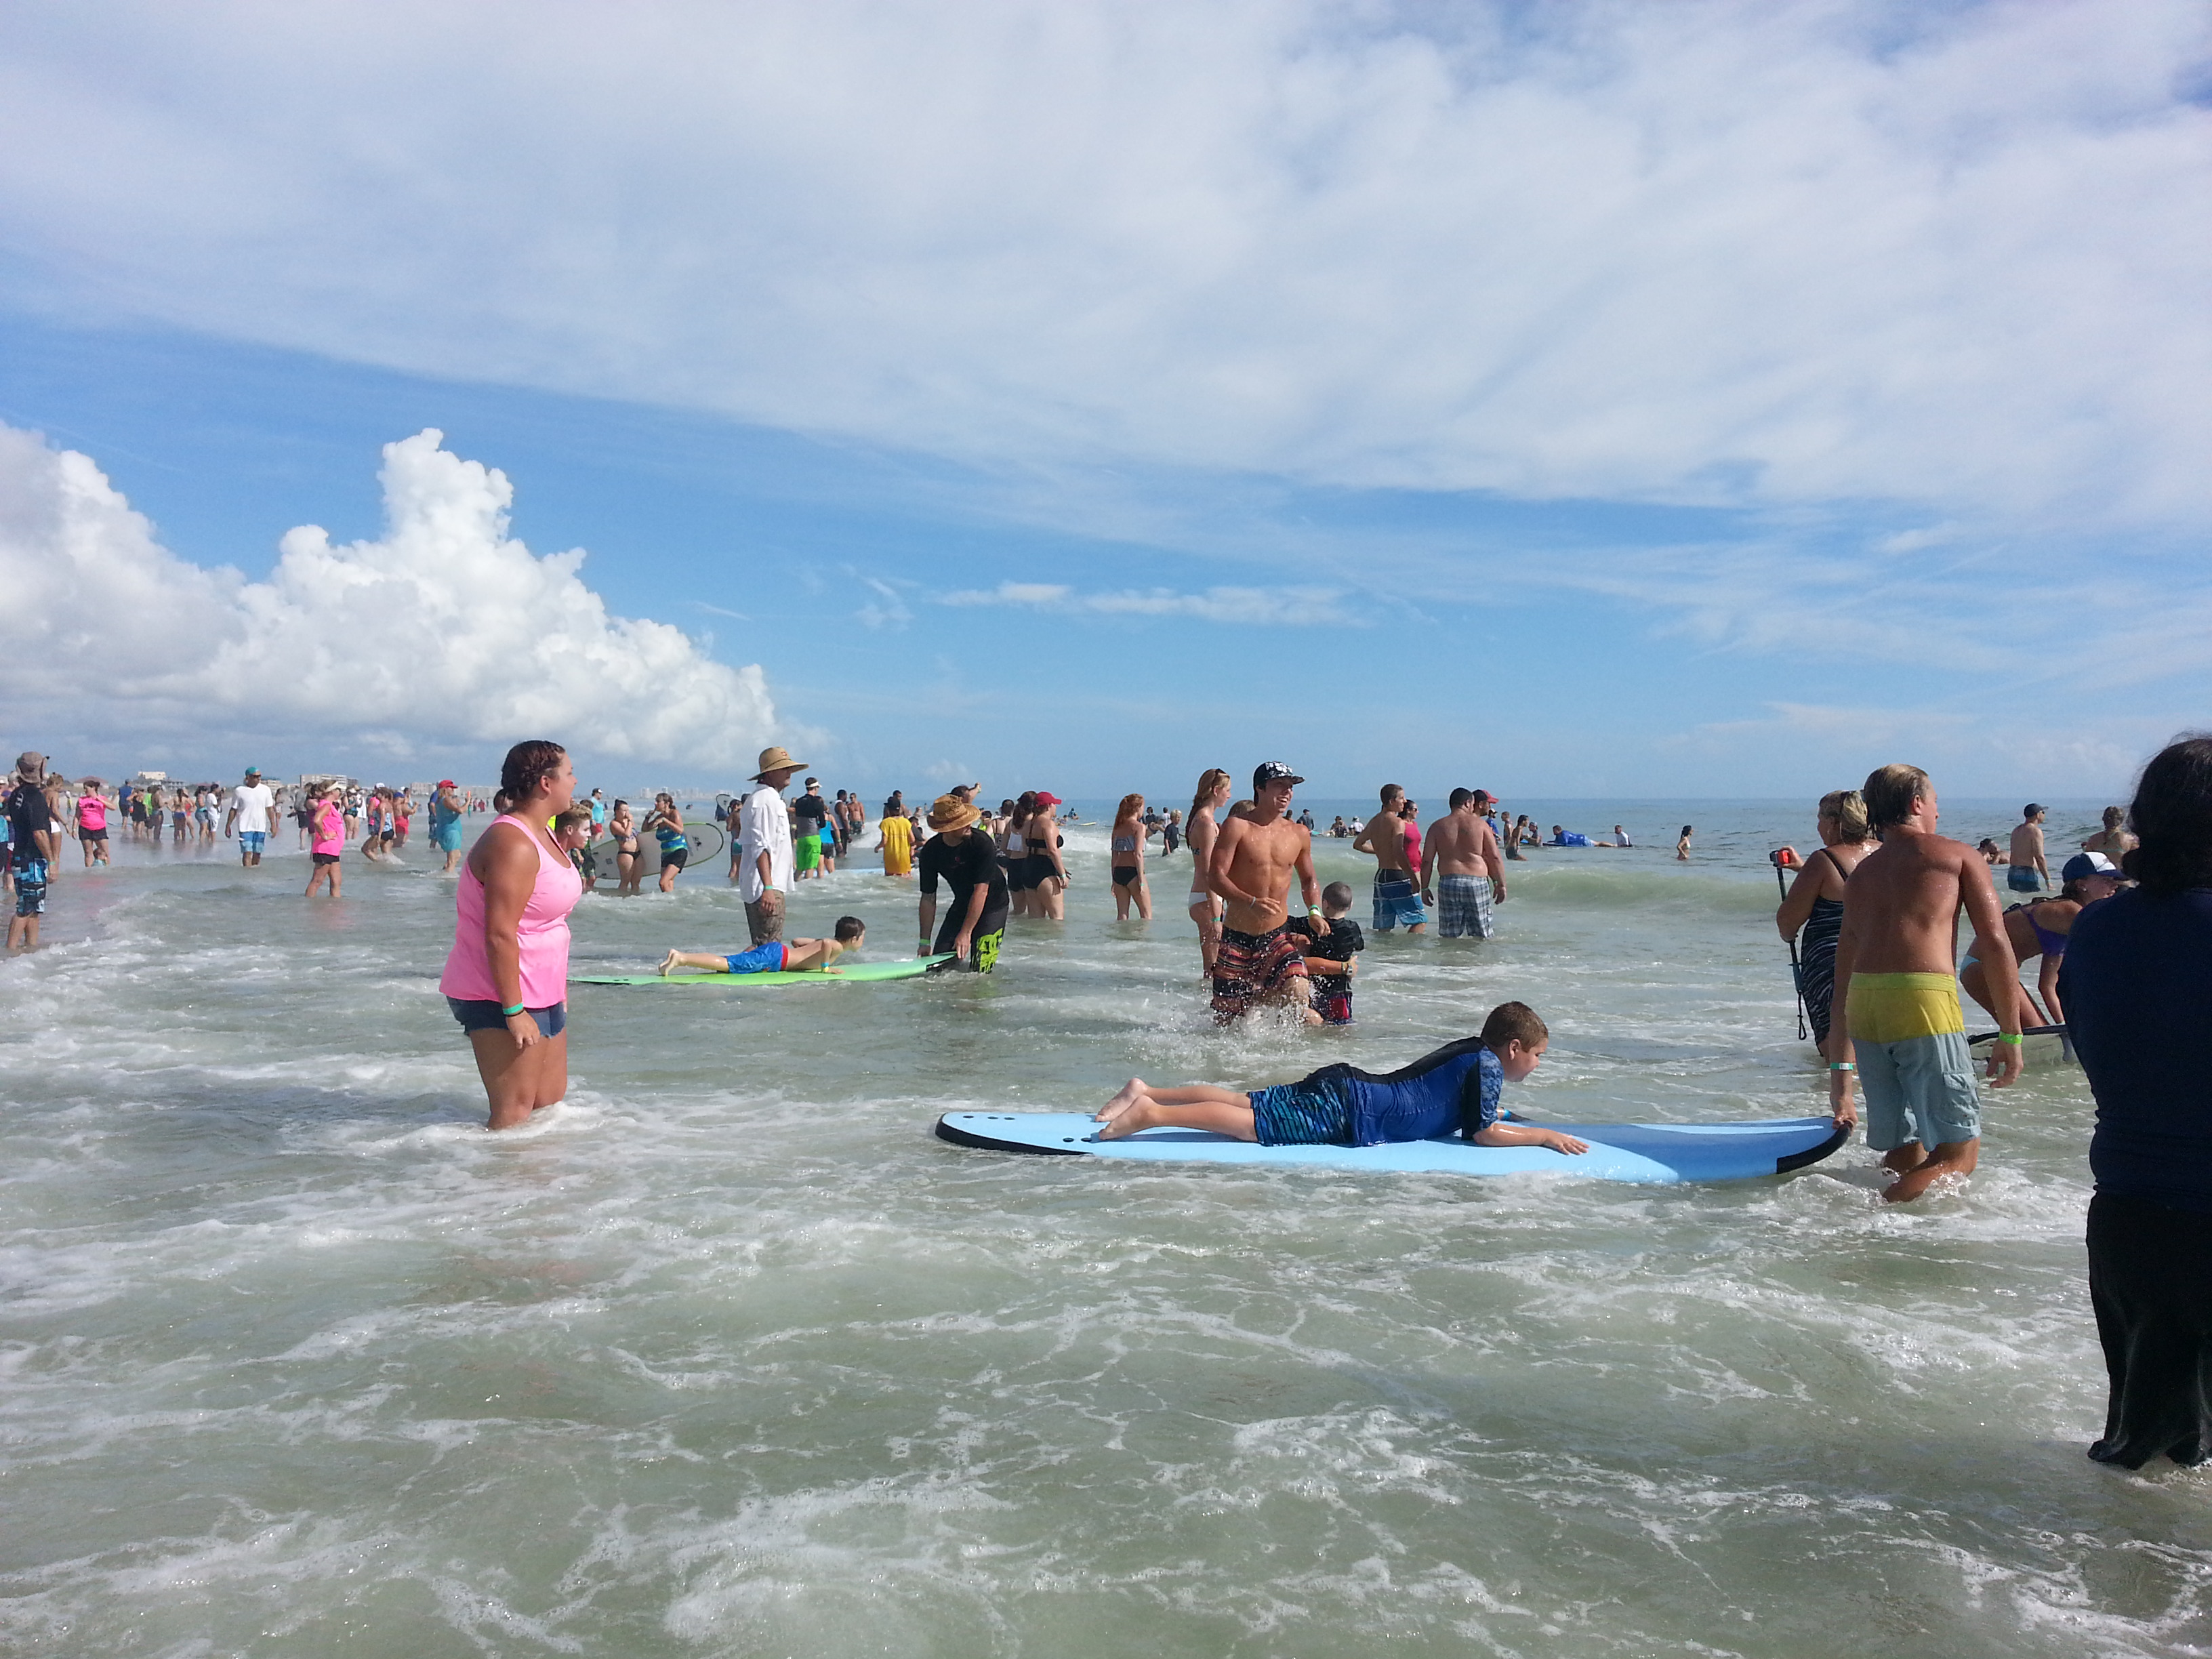 Everyone paddling out hoping to catch some waves.